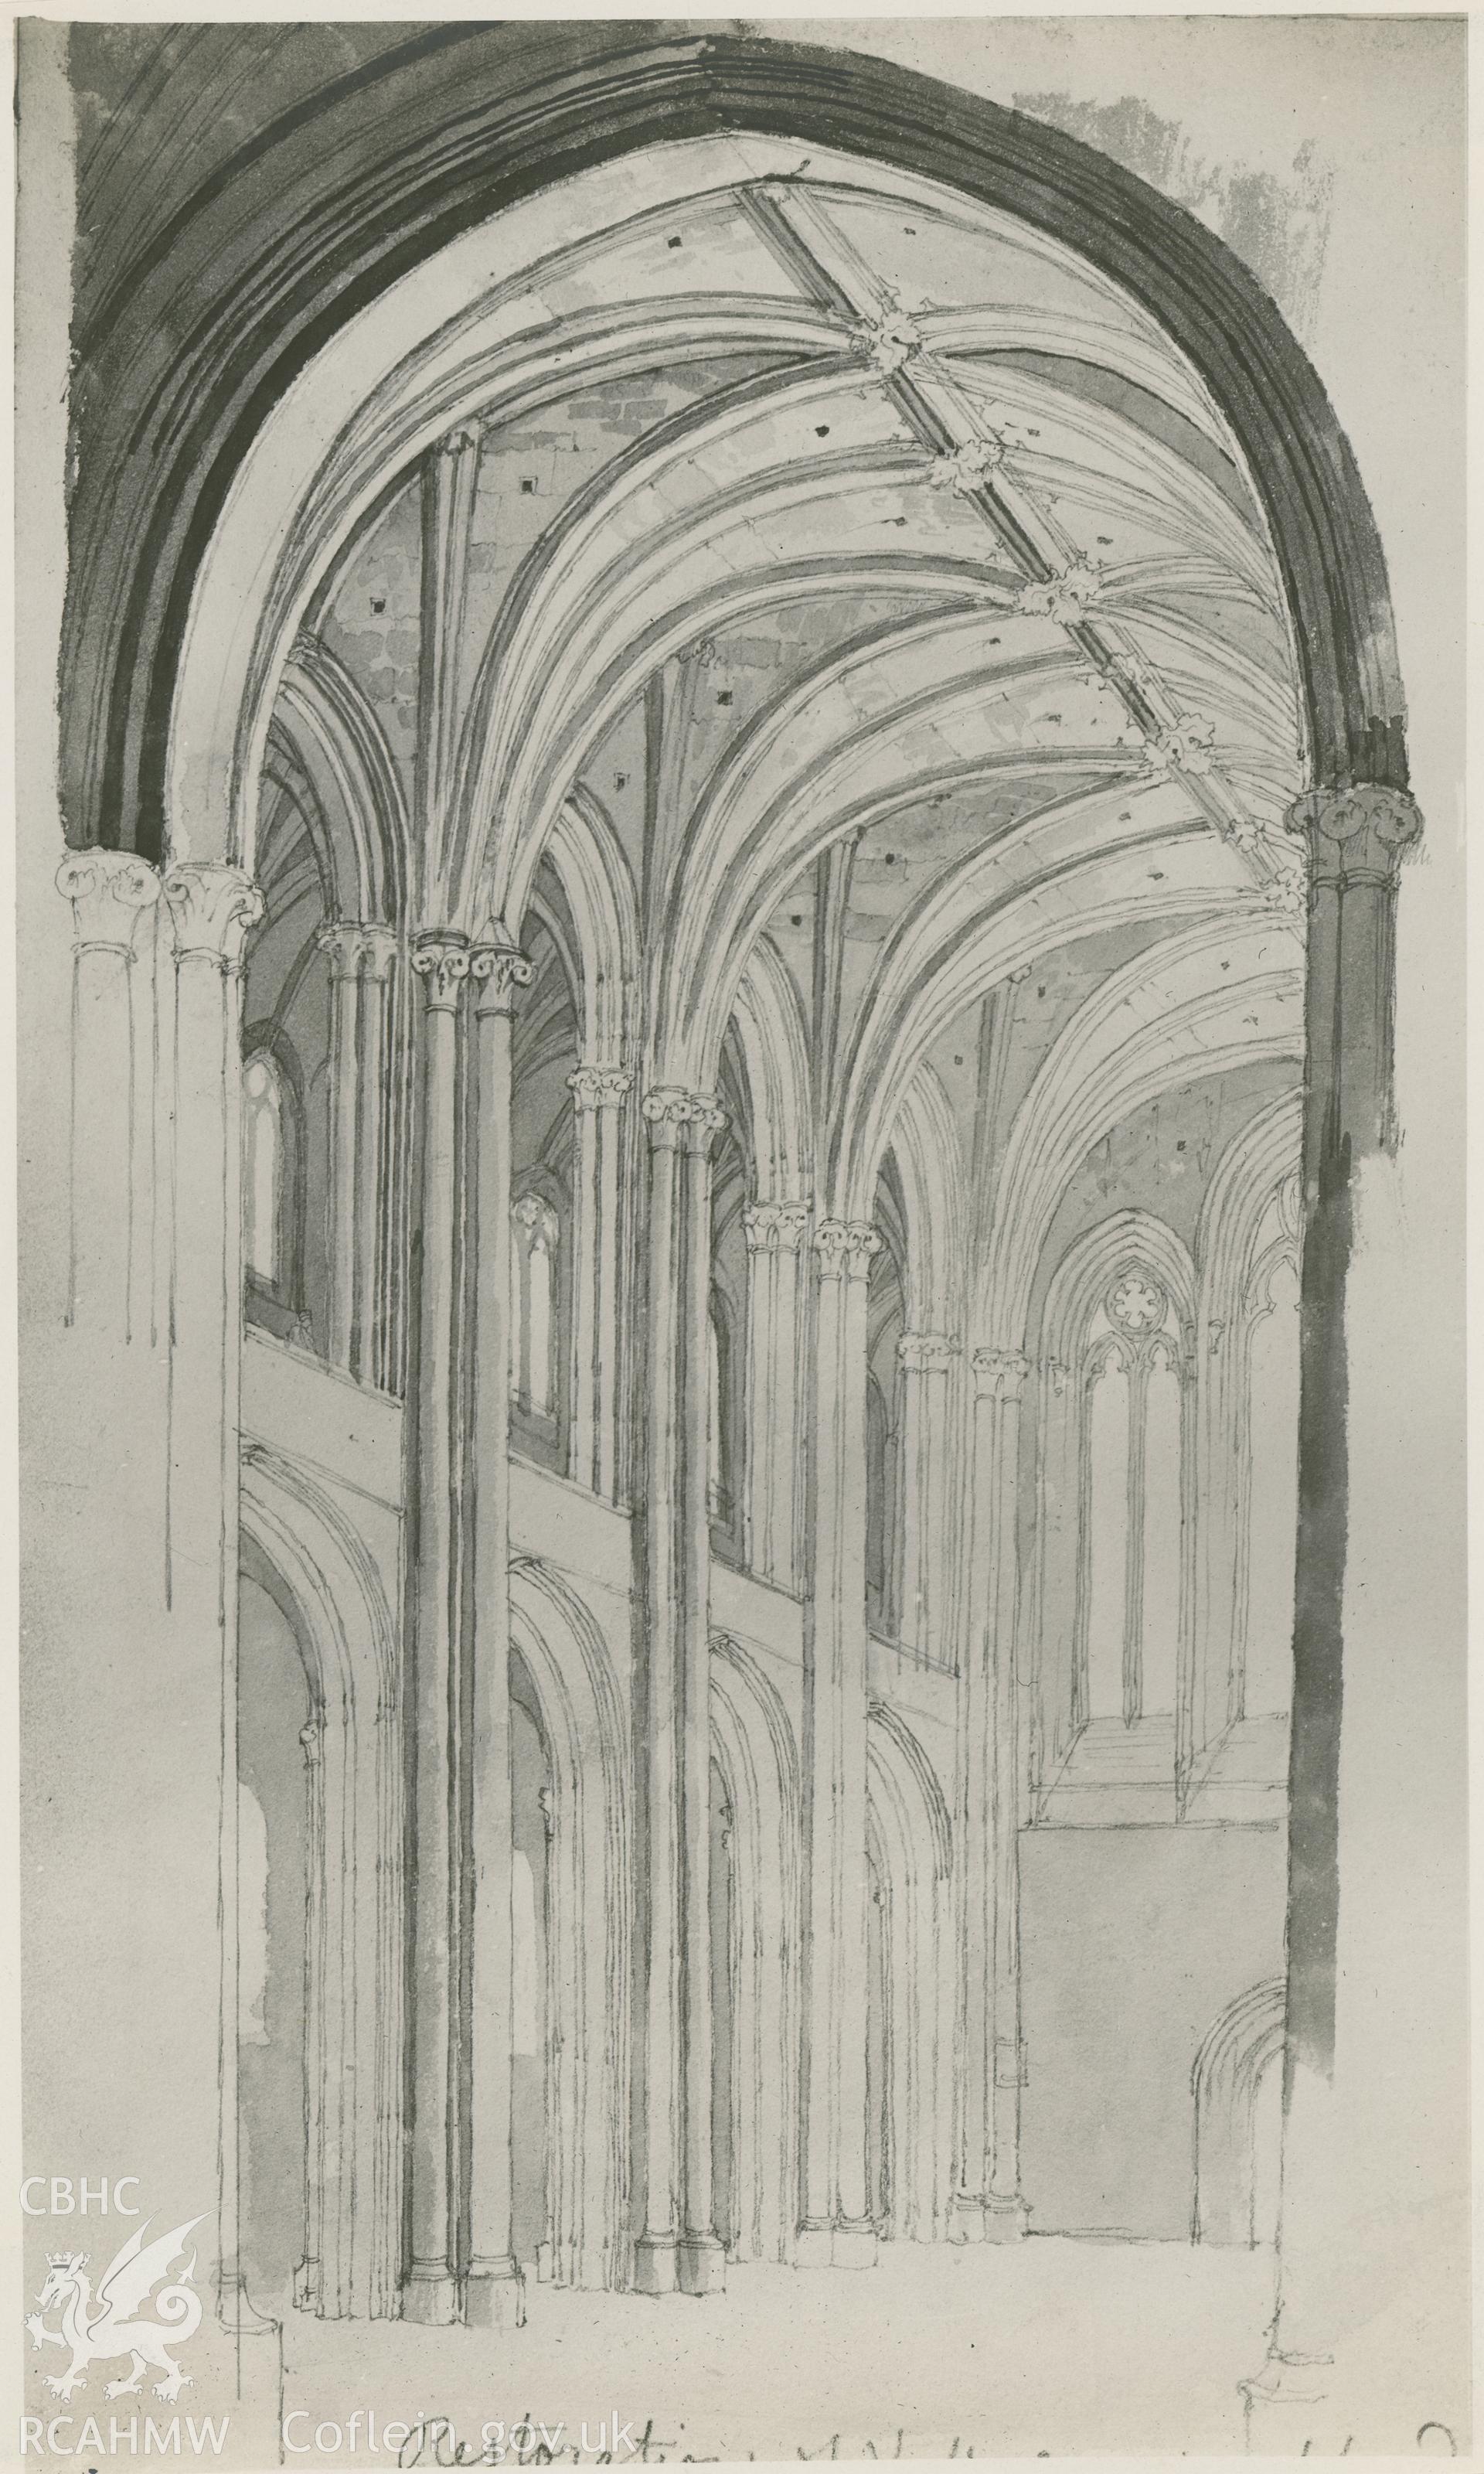 Photographic print by Macbeth of a pencil sketch showing restoration of nave.